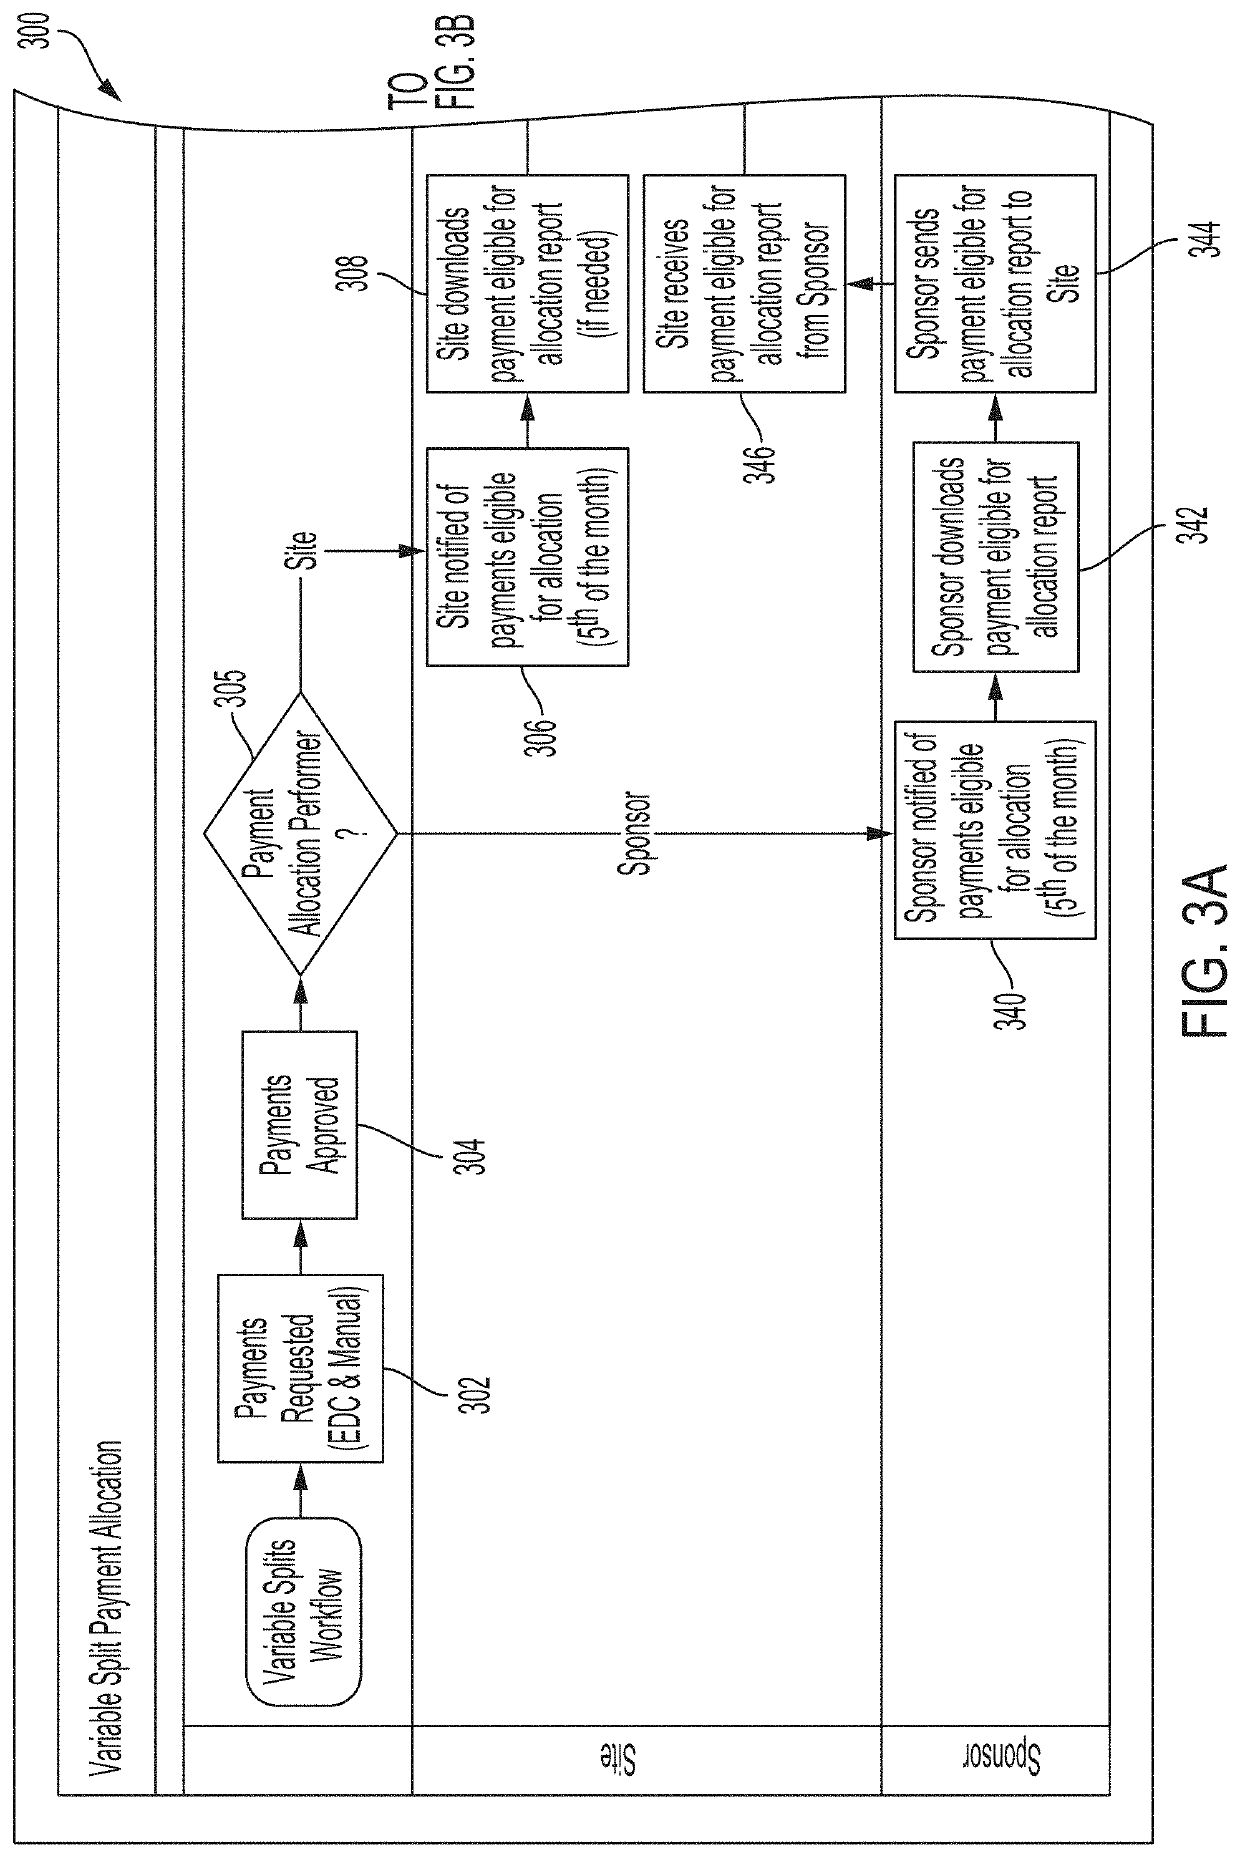 System and method for graphical user interface management providing flexible and accurate administration of clinical trials